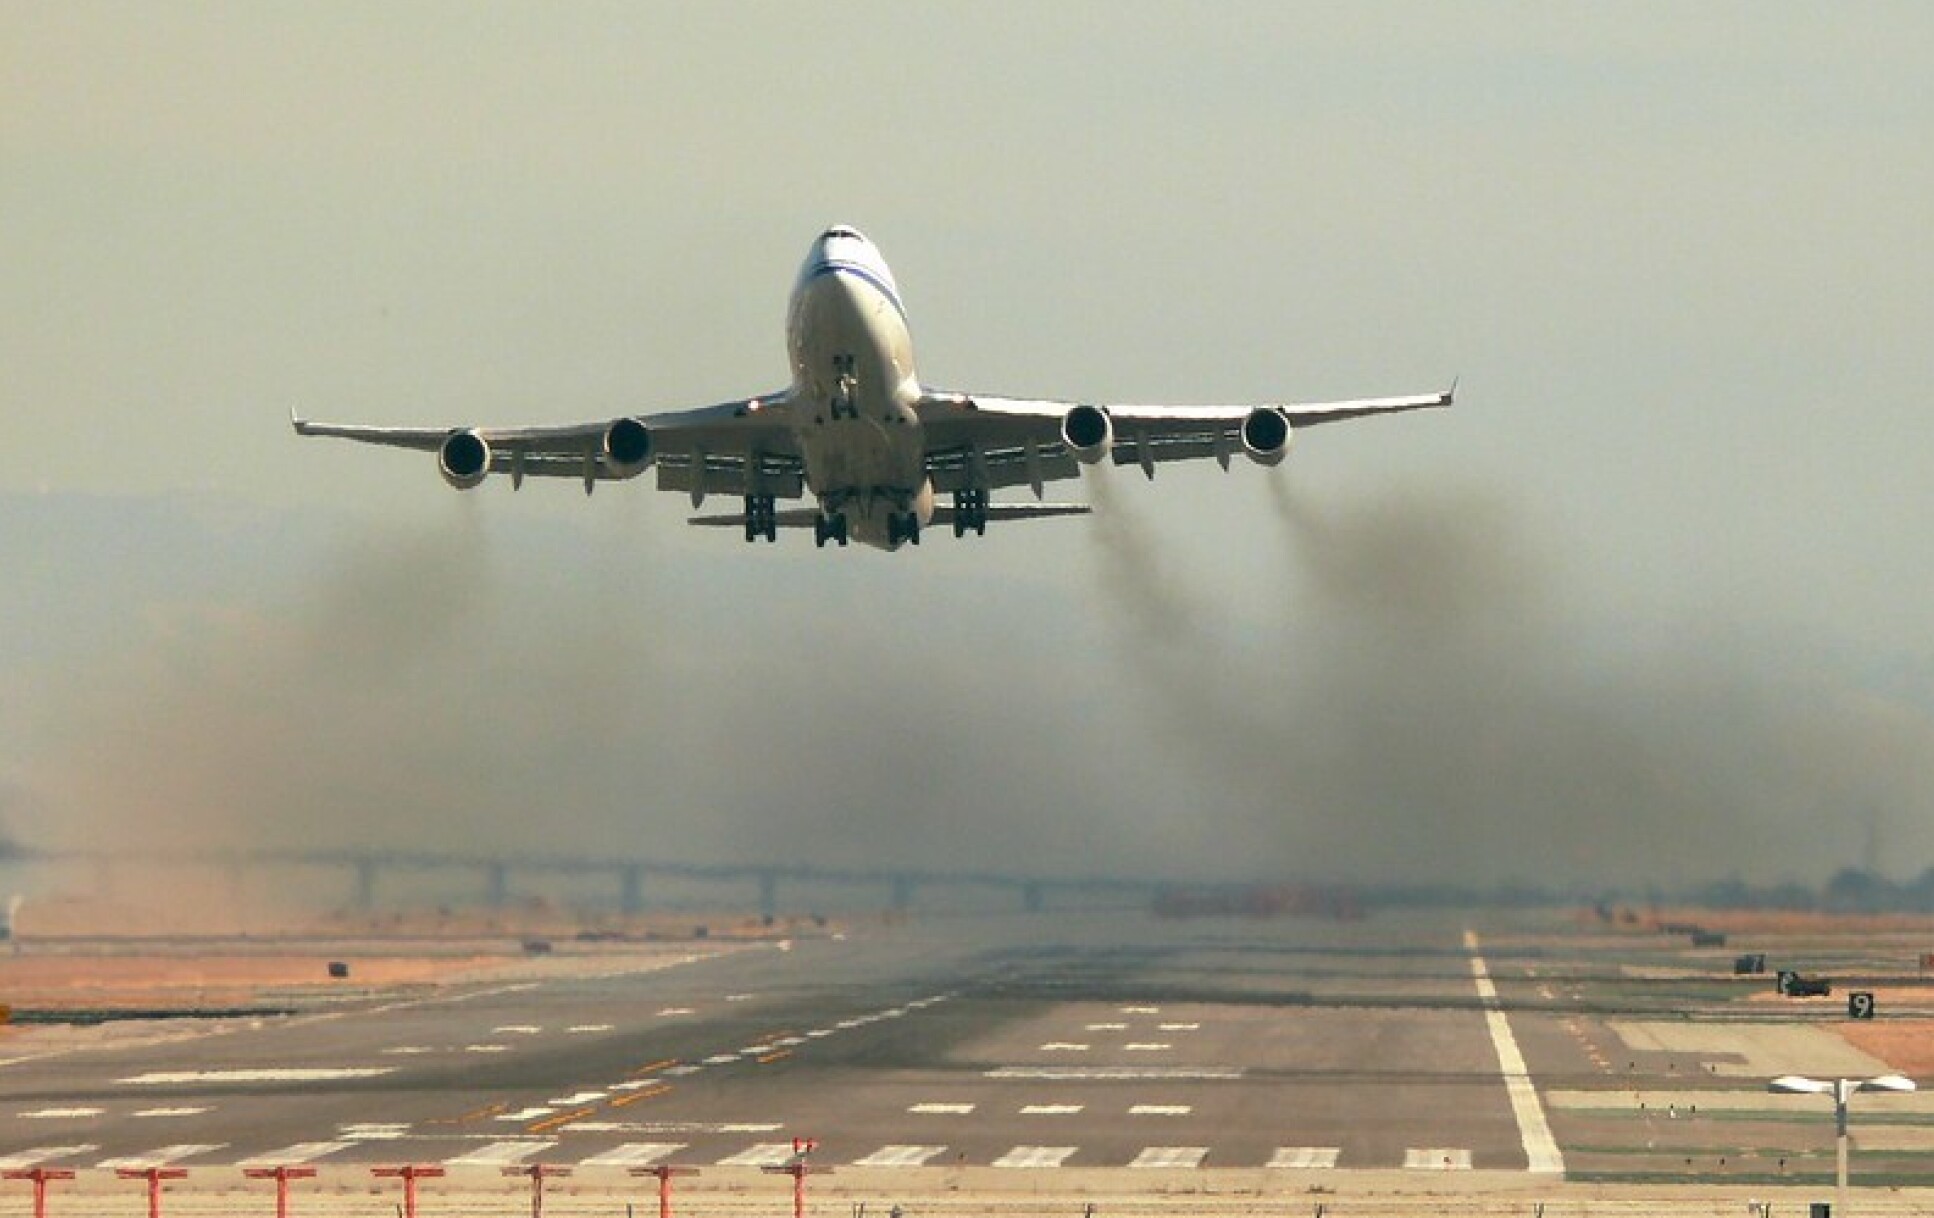 An airplane taking off while releasing carbon pollution.